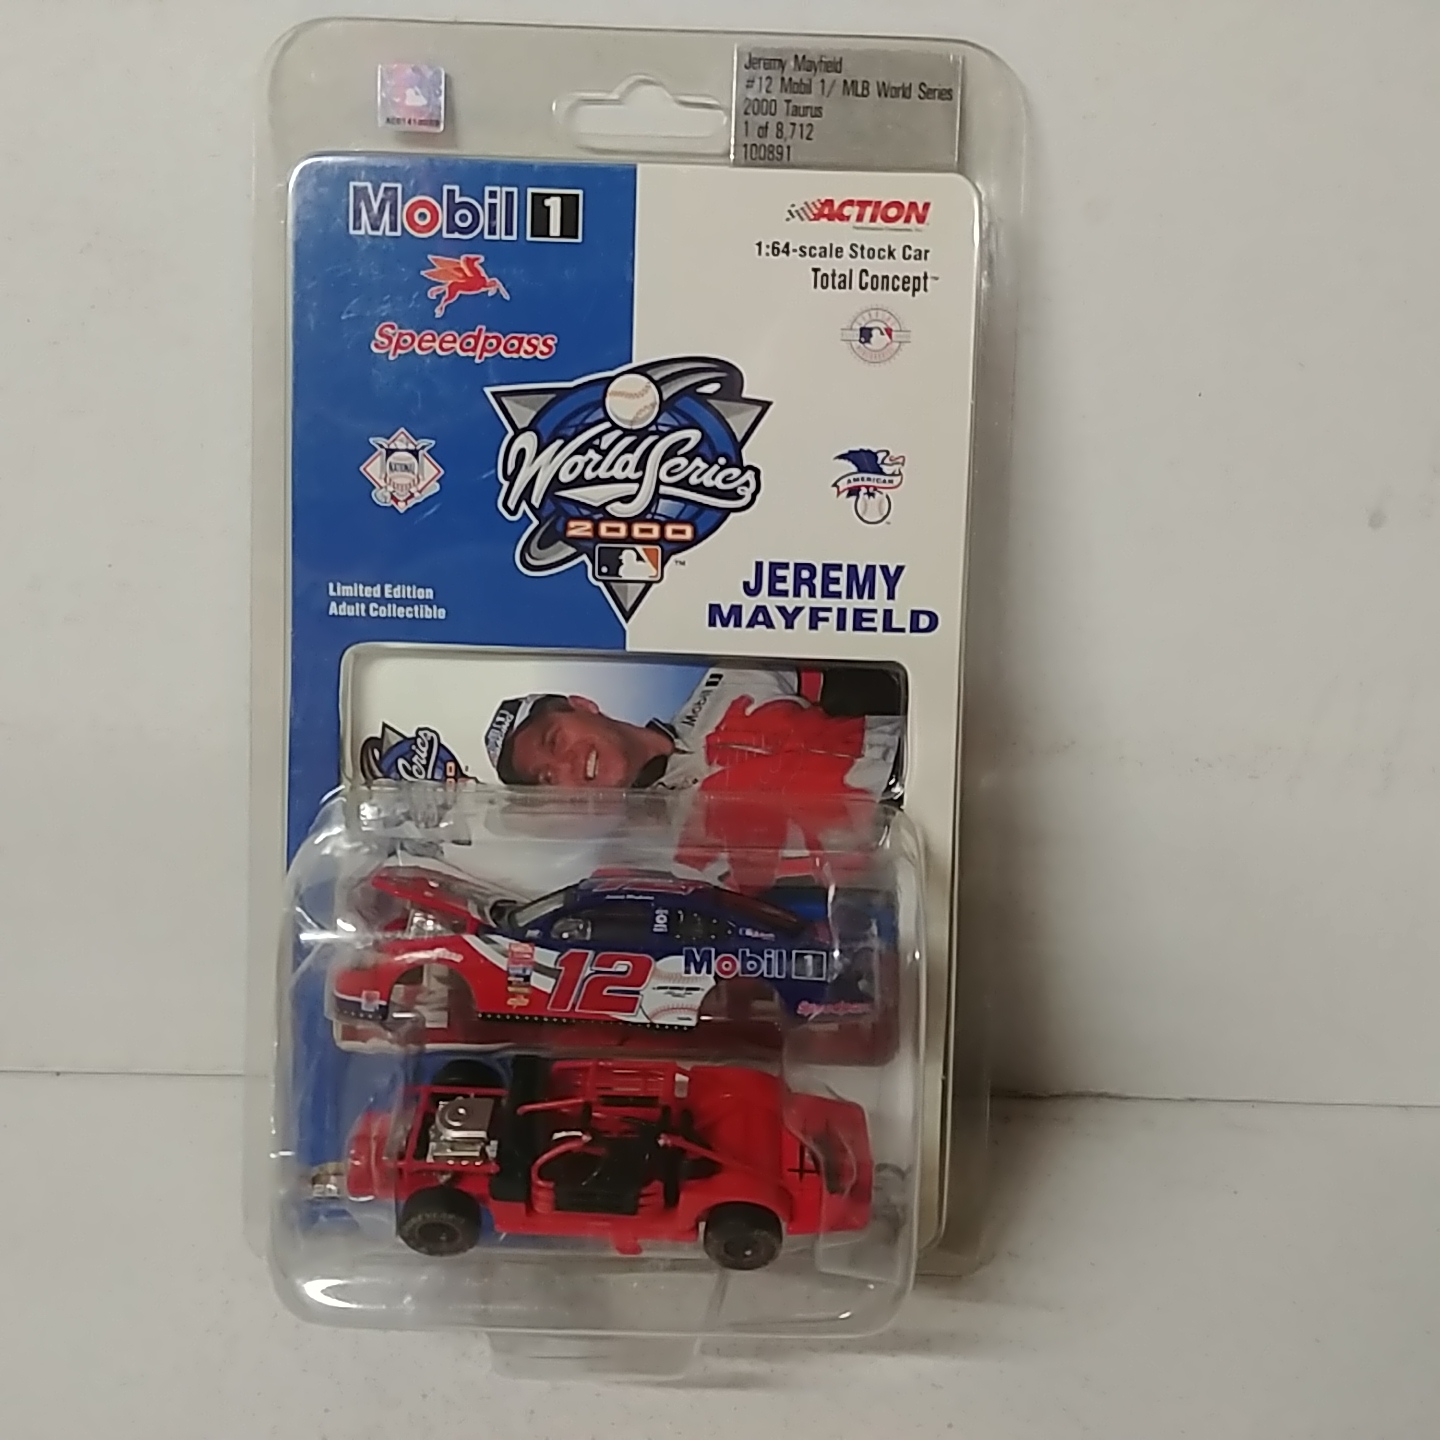 2000 Jeremy Mayfield 1/64th Mobil1  "MLB World Series" Total Concept Taurus